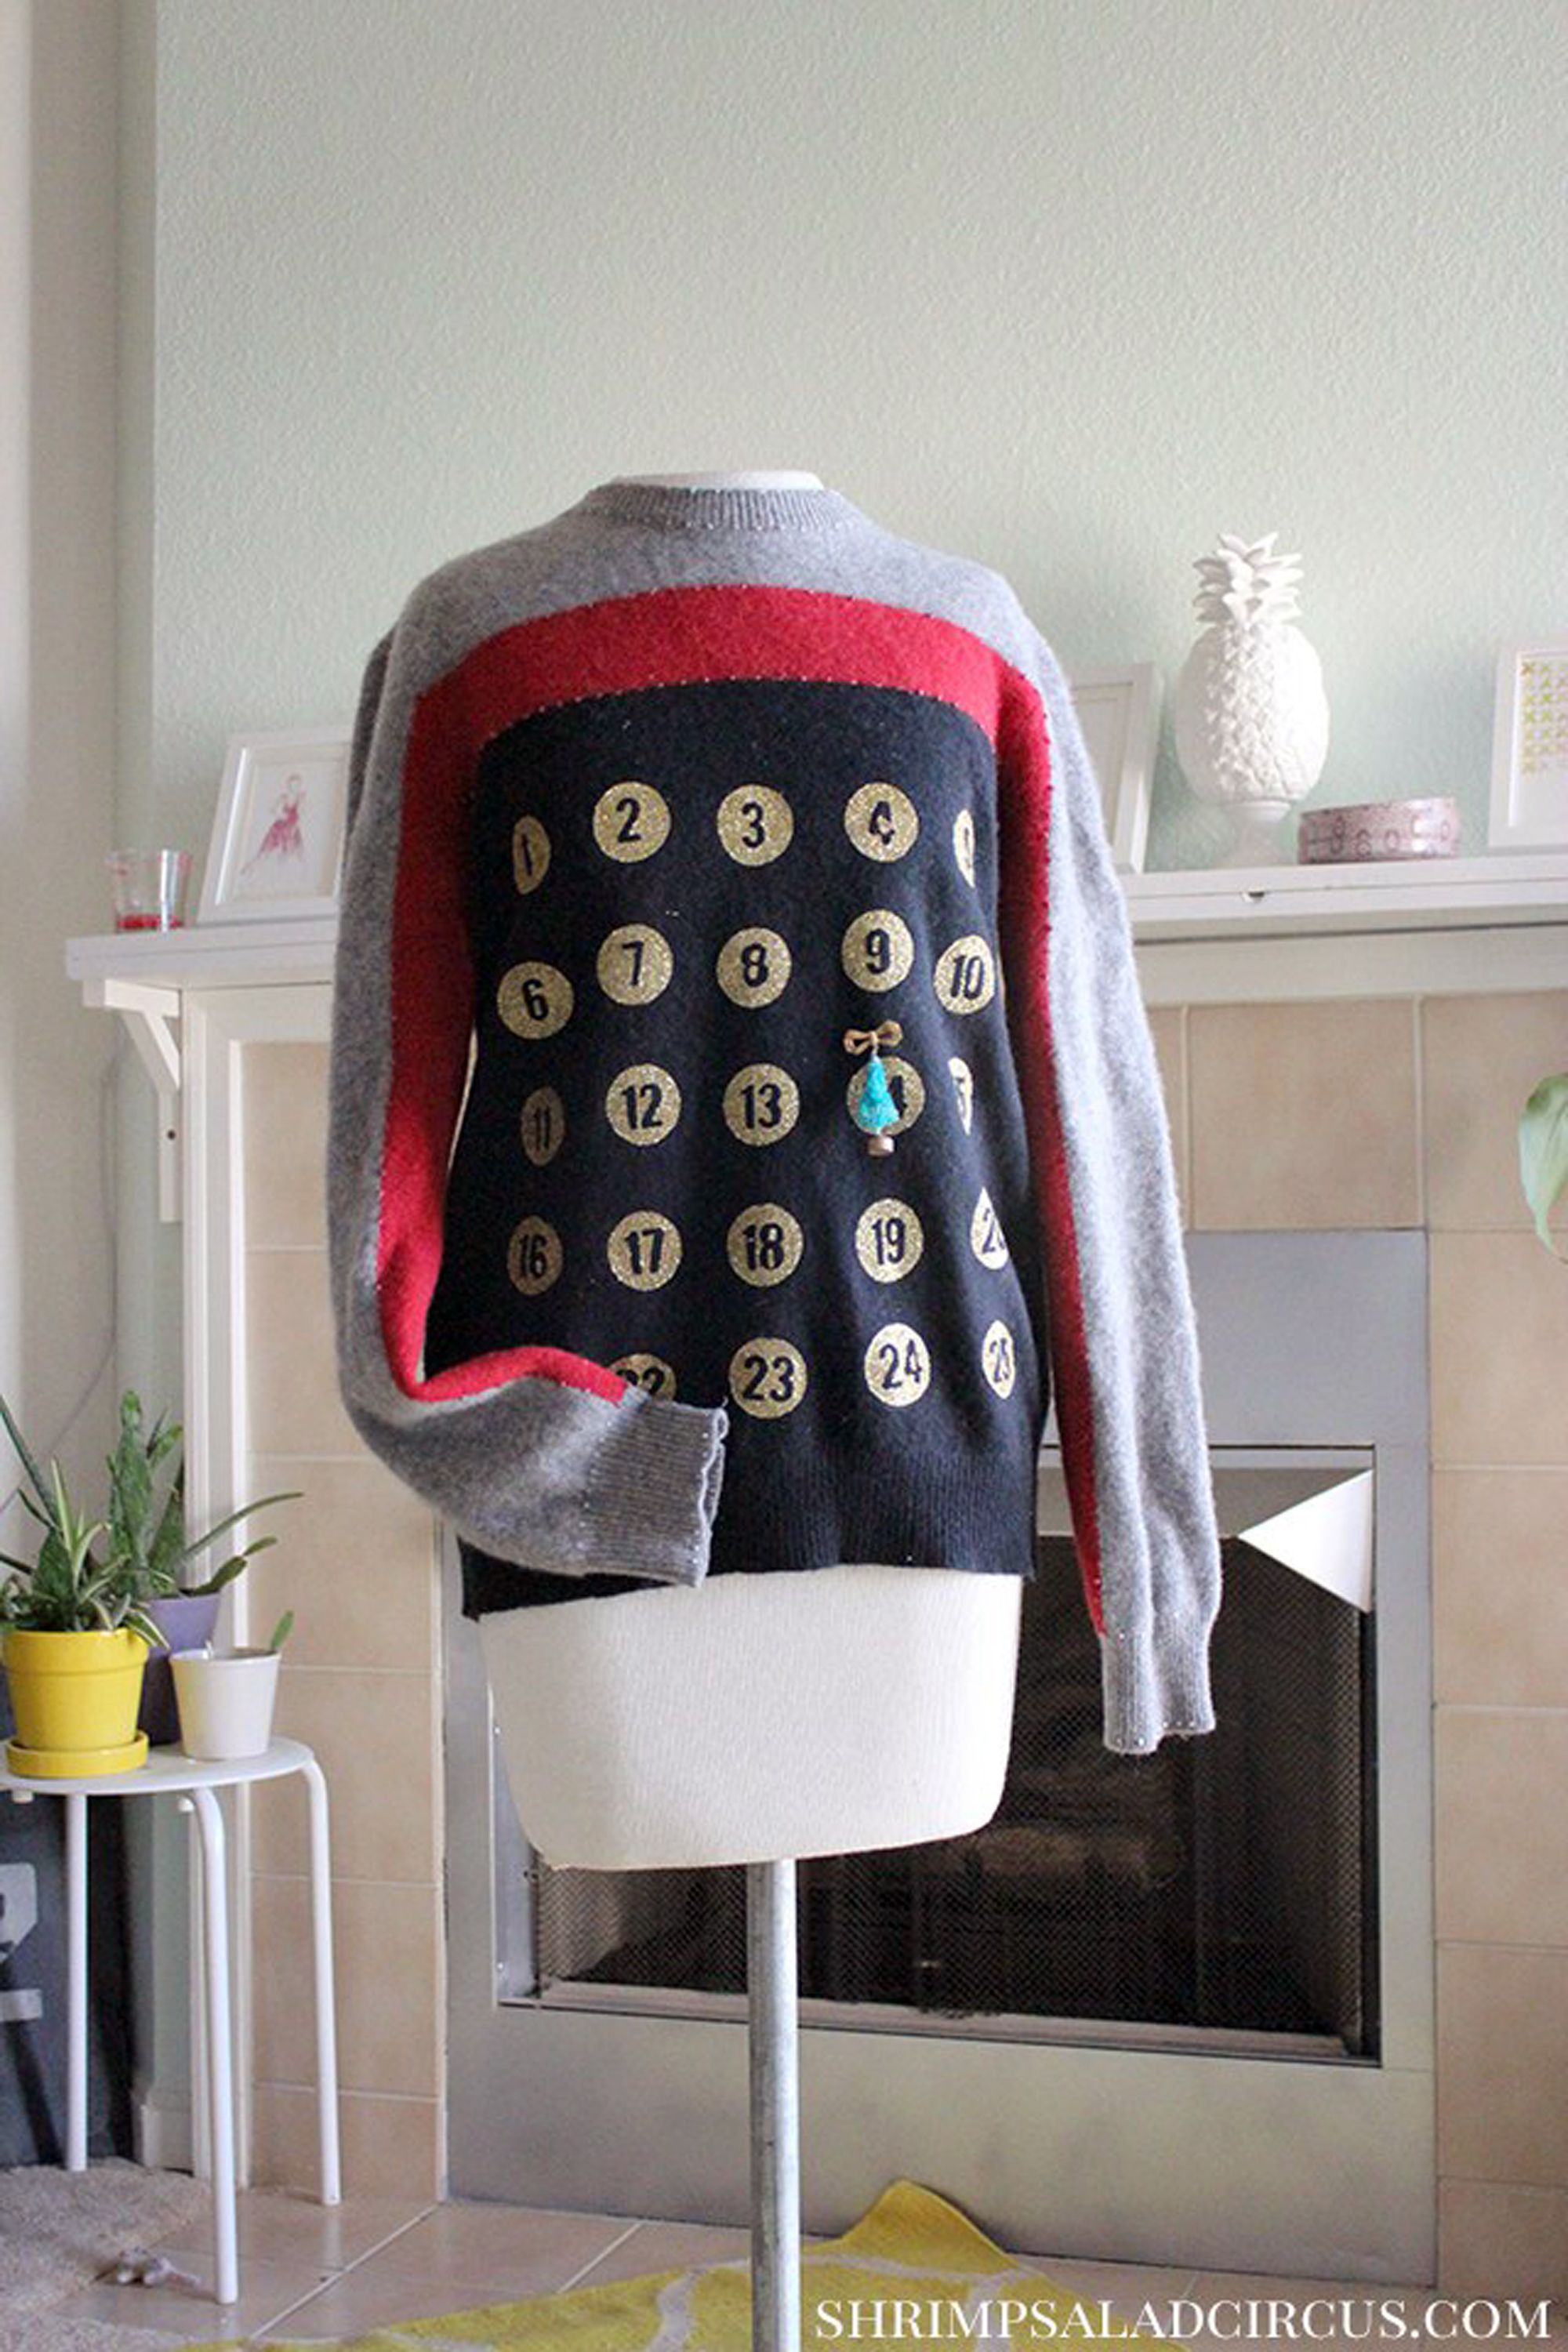 45 DIY Ugly Christmas Sweater Ideas That Are Awesomely Bad - Redbubble Life